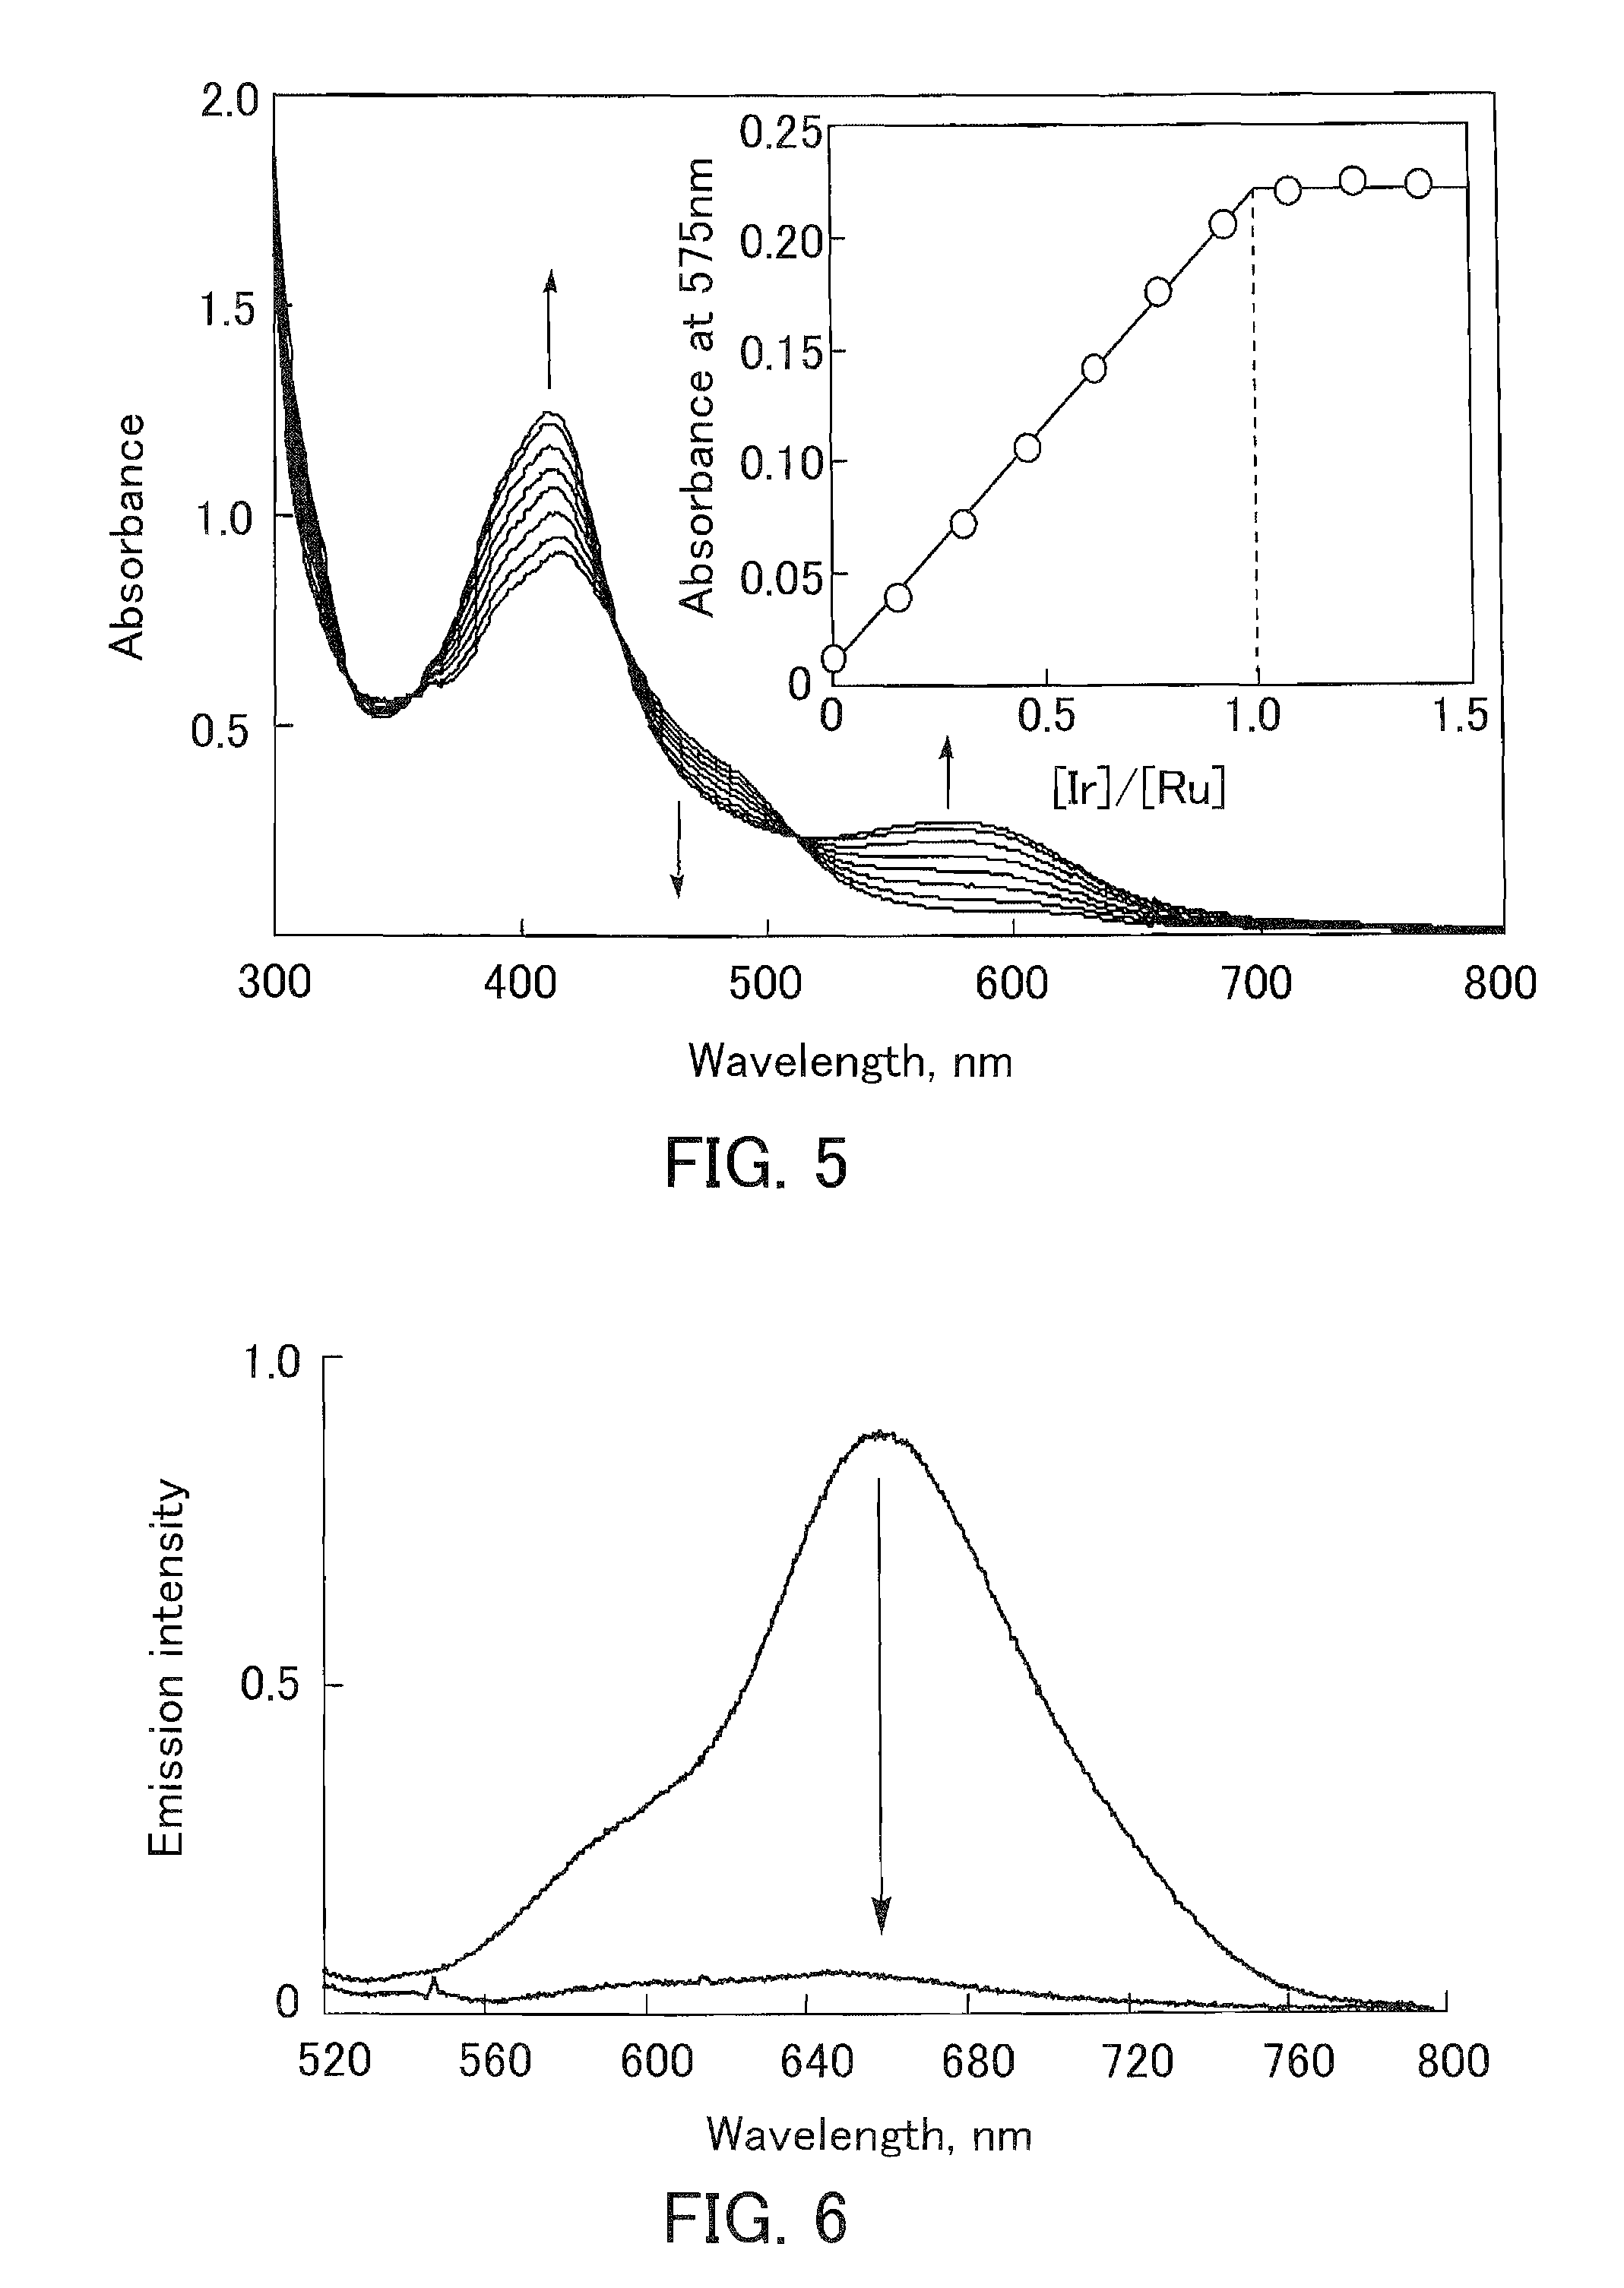 Catalyst for decomposition of formic acid, method for decomposing formic acid, process for producing hydrogen, apparatus for producing and decomposing formic acid, and method for storing and generating hydrogen